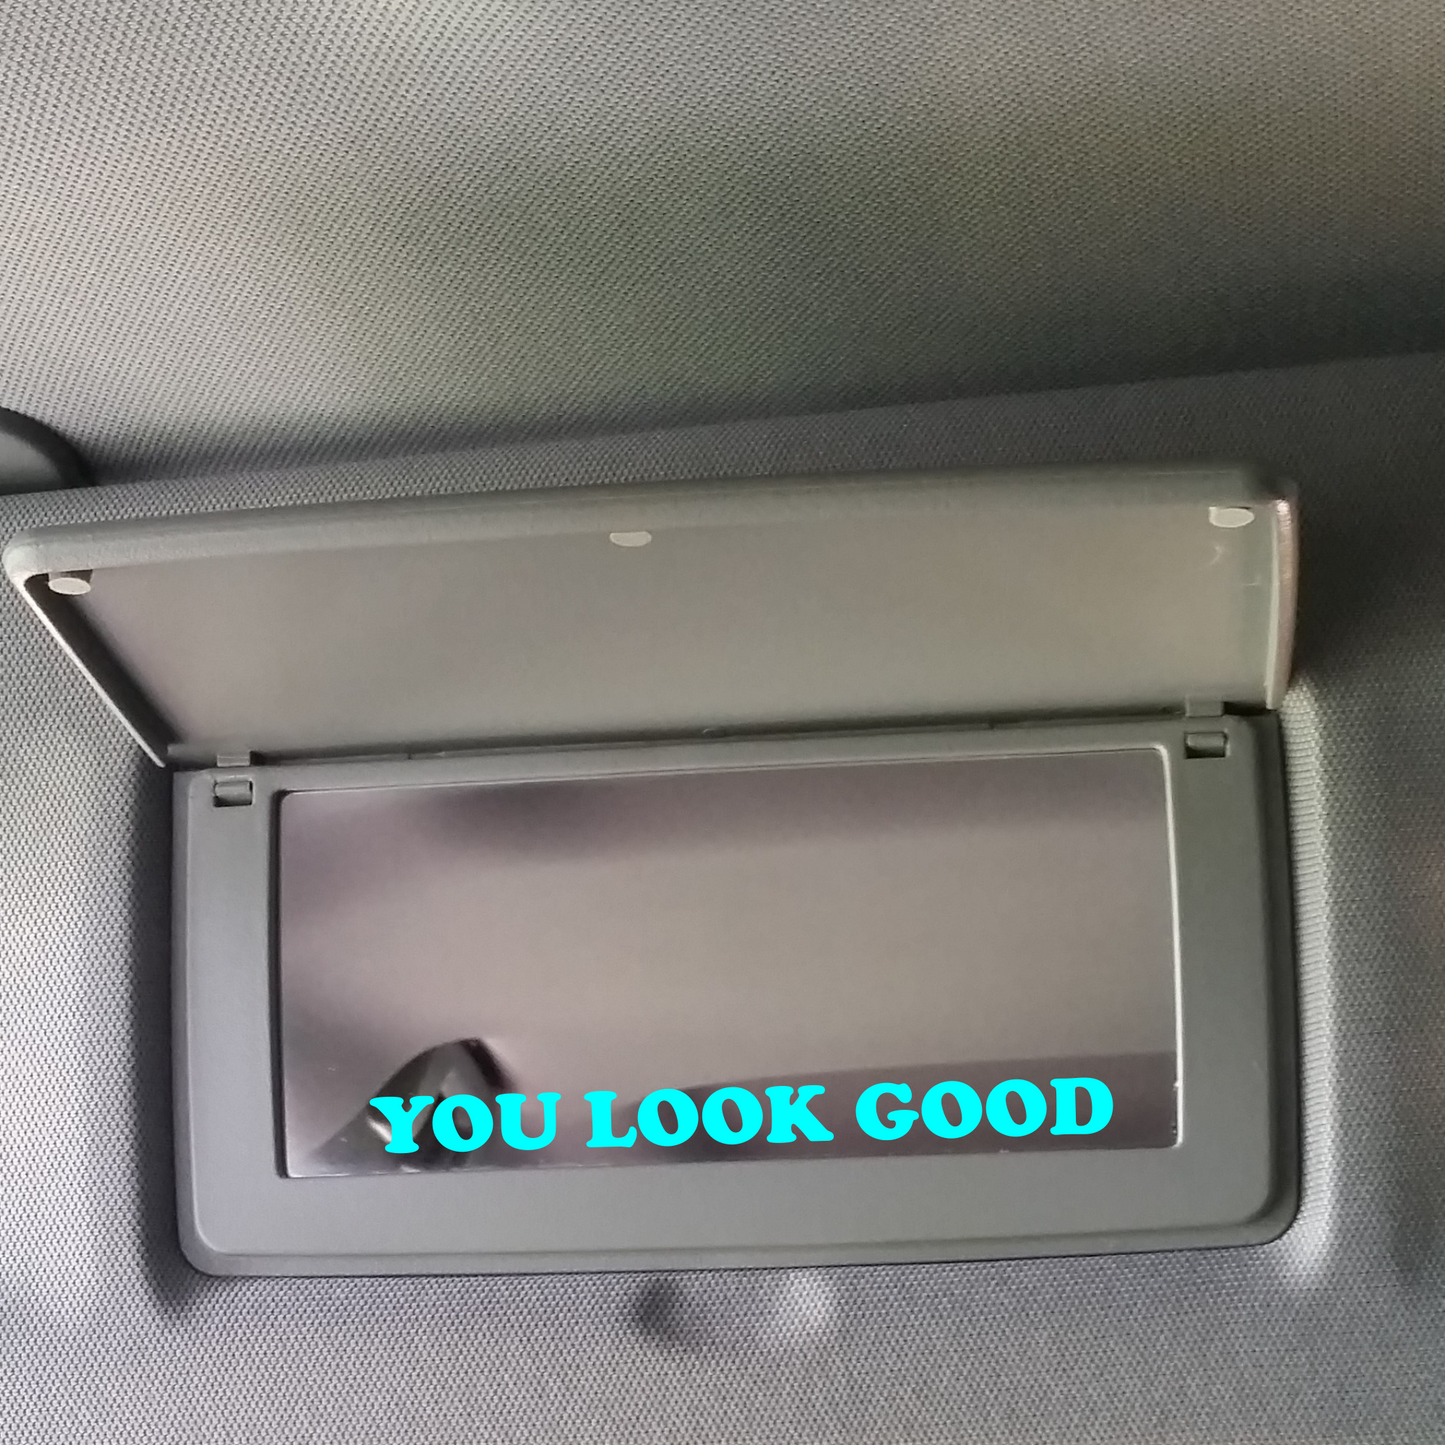 You Look Good, Self Affirmation Vinyl Decal, Vanity Mirror Decal, Positive Vibe Decal